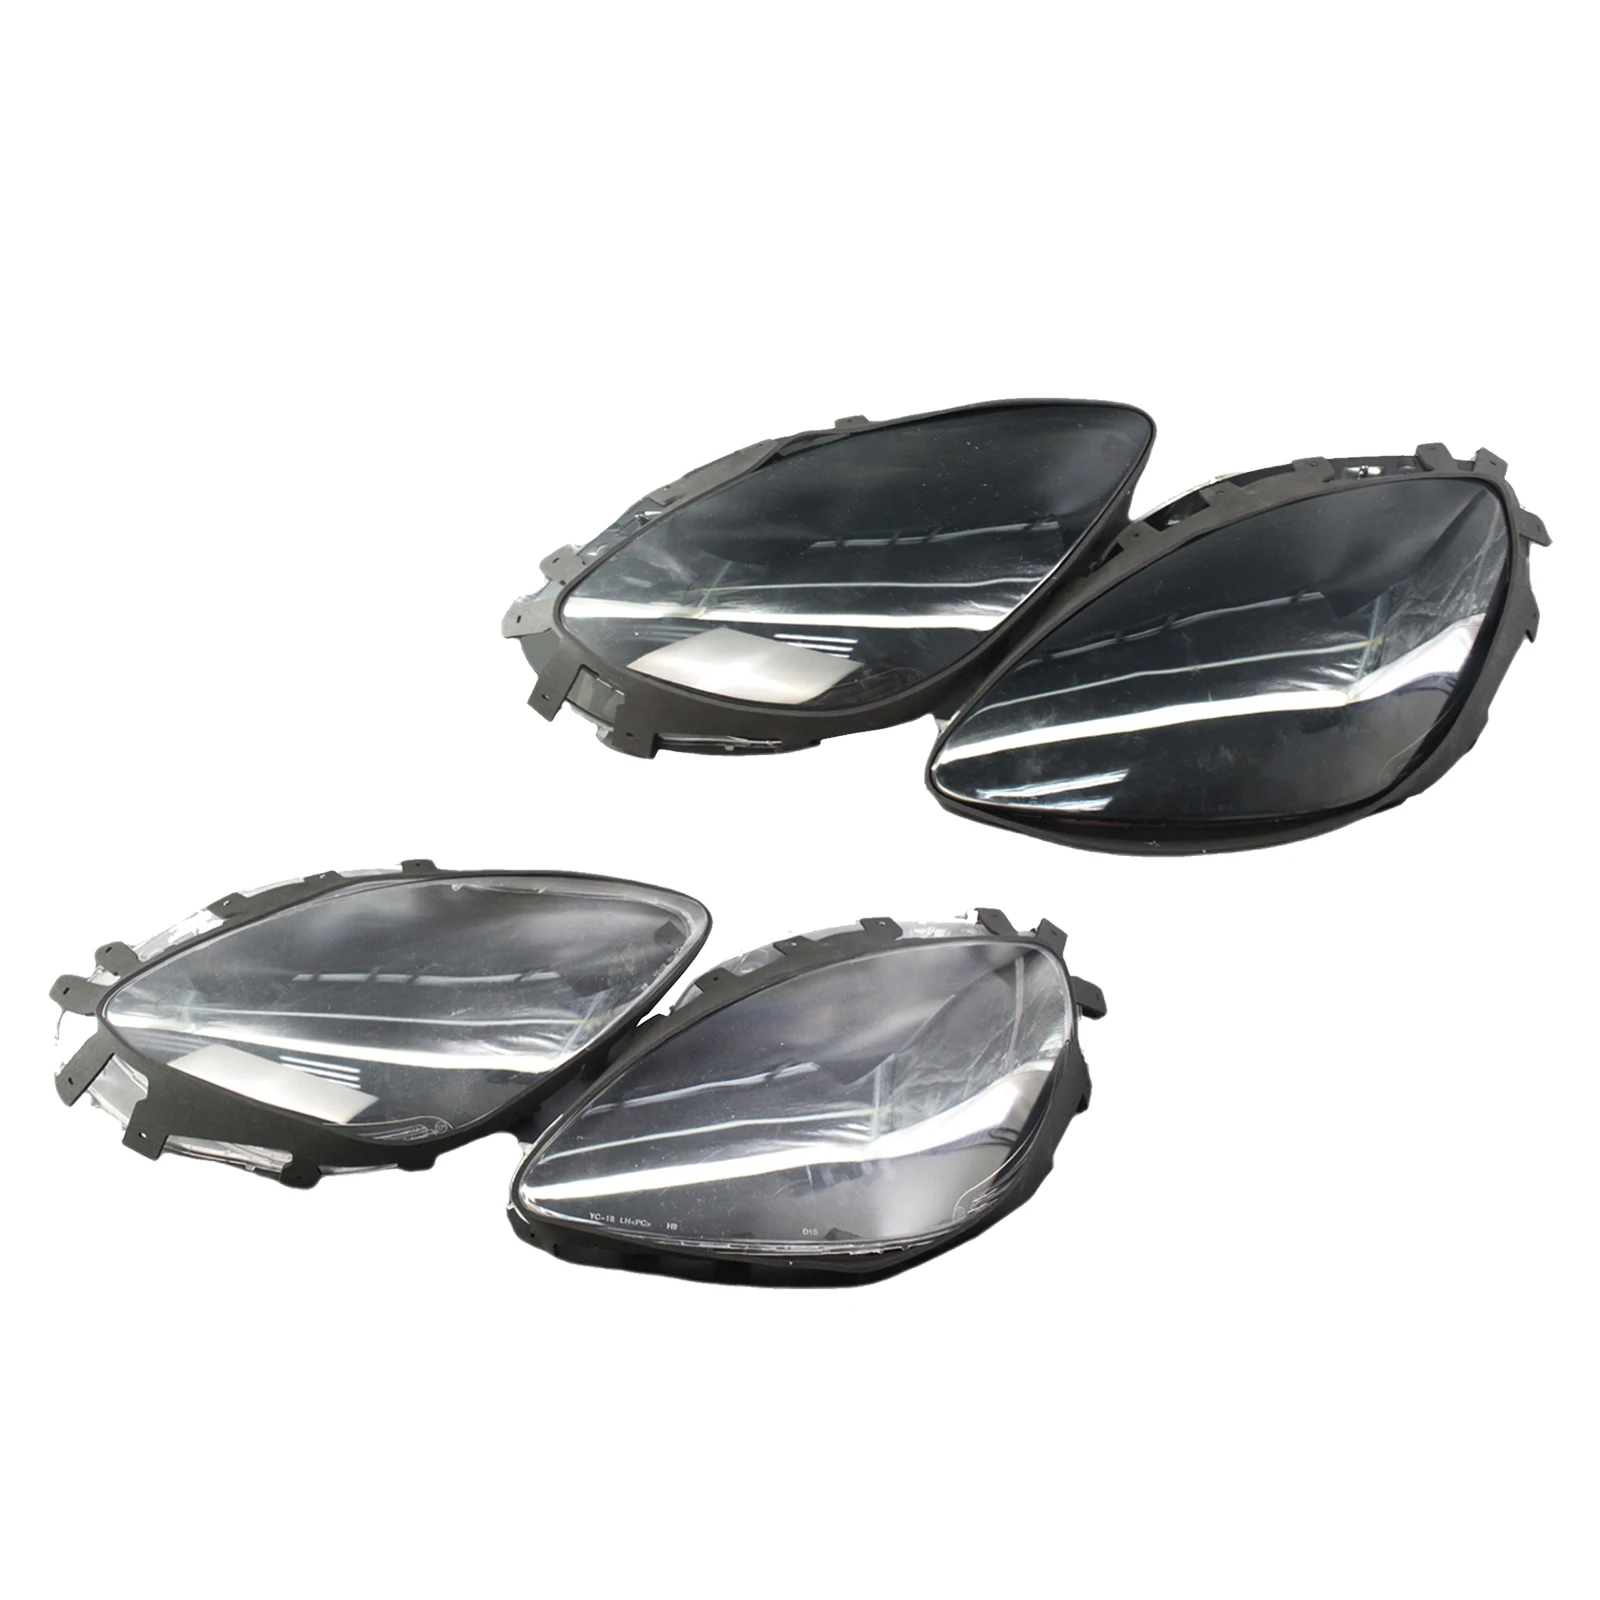 

Auto Headlight Headlamp Replacement Lens Shell Covers For Corvette C6 20789688 20936417 20936418 20936419 20789711 25785290